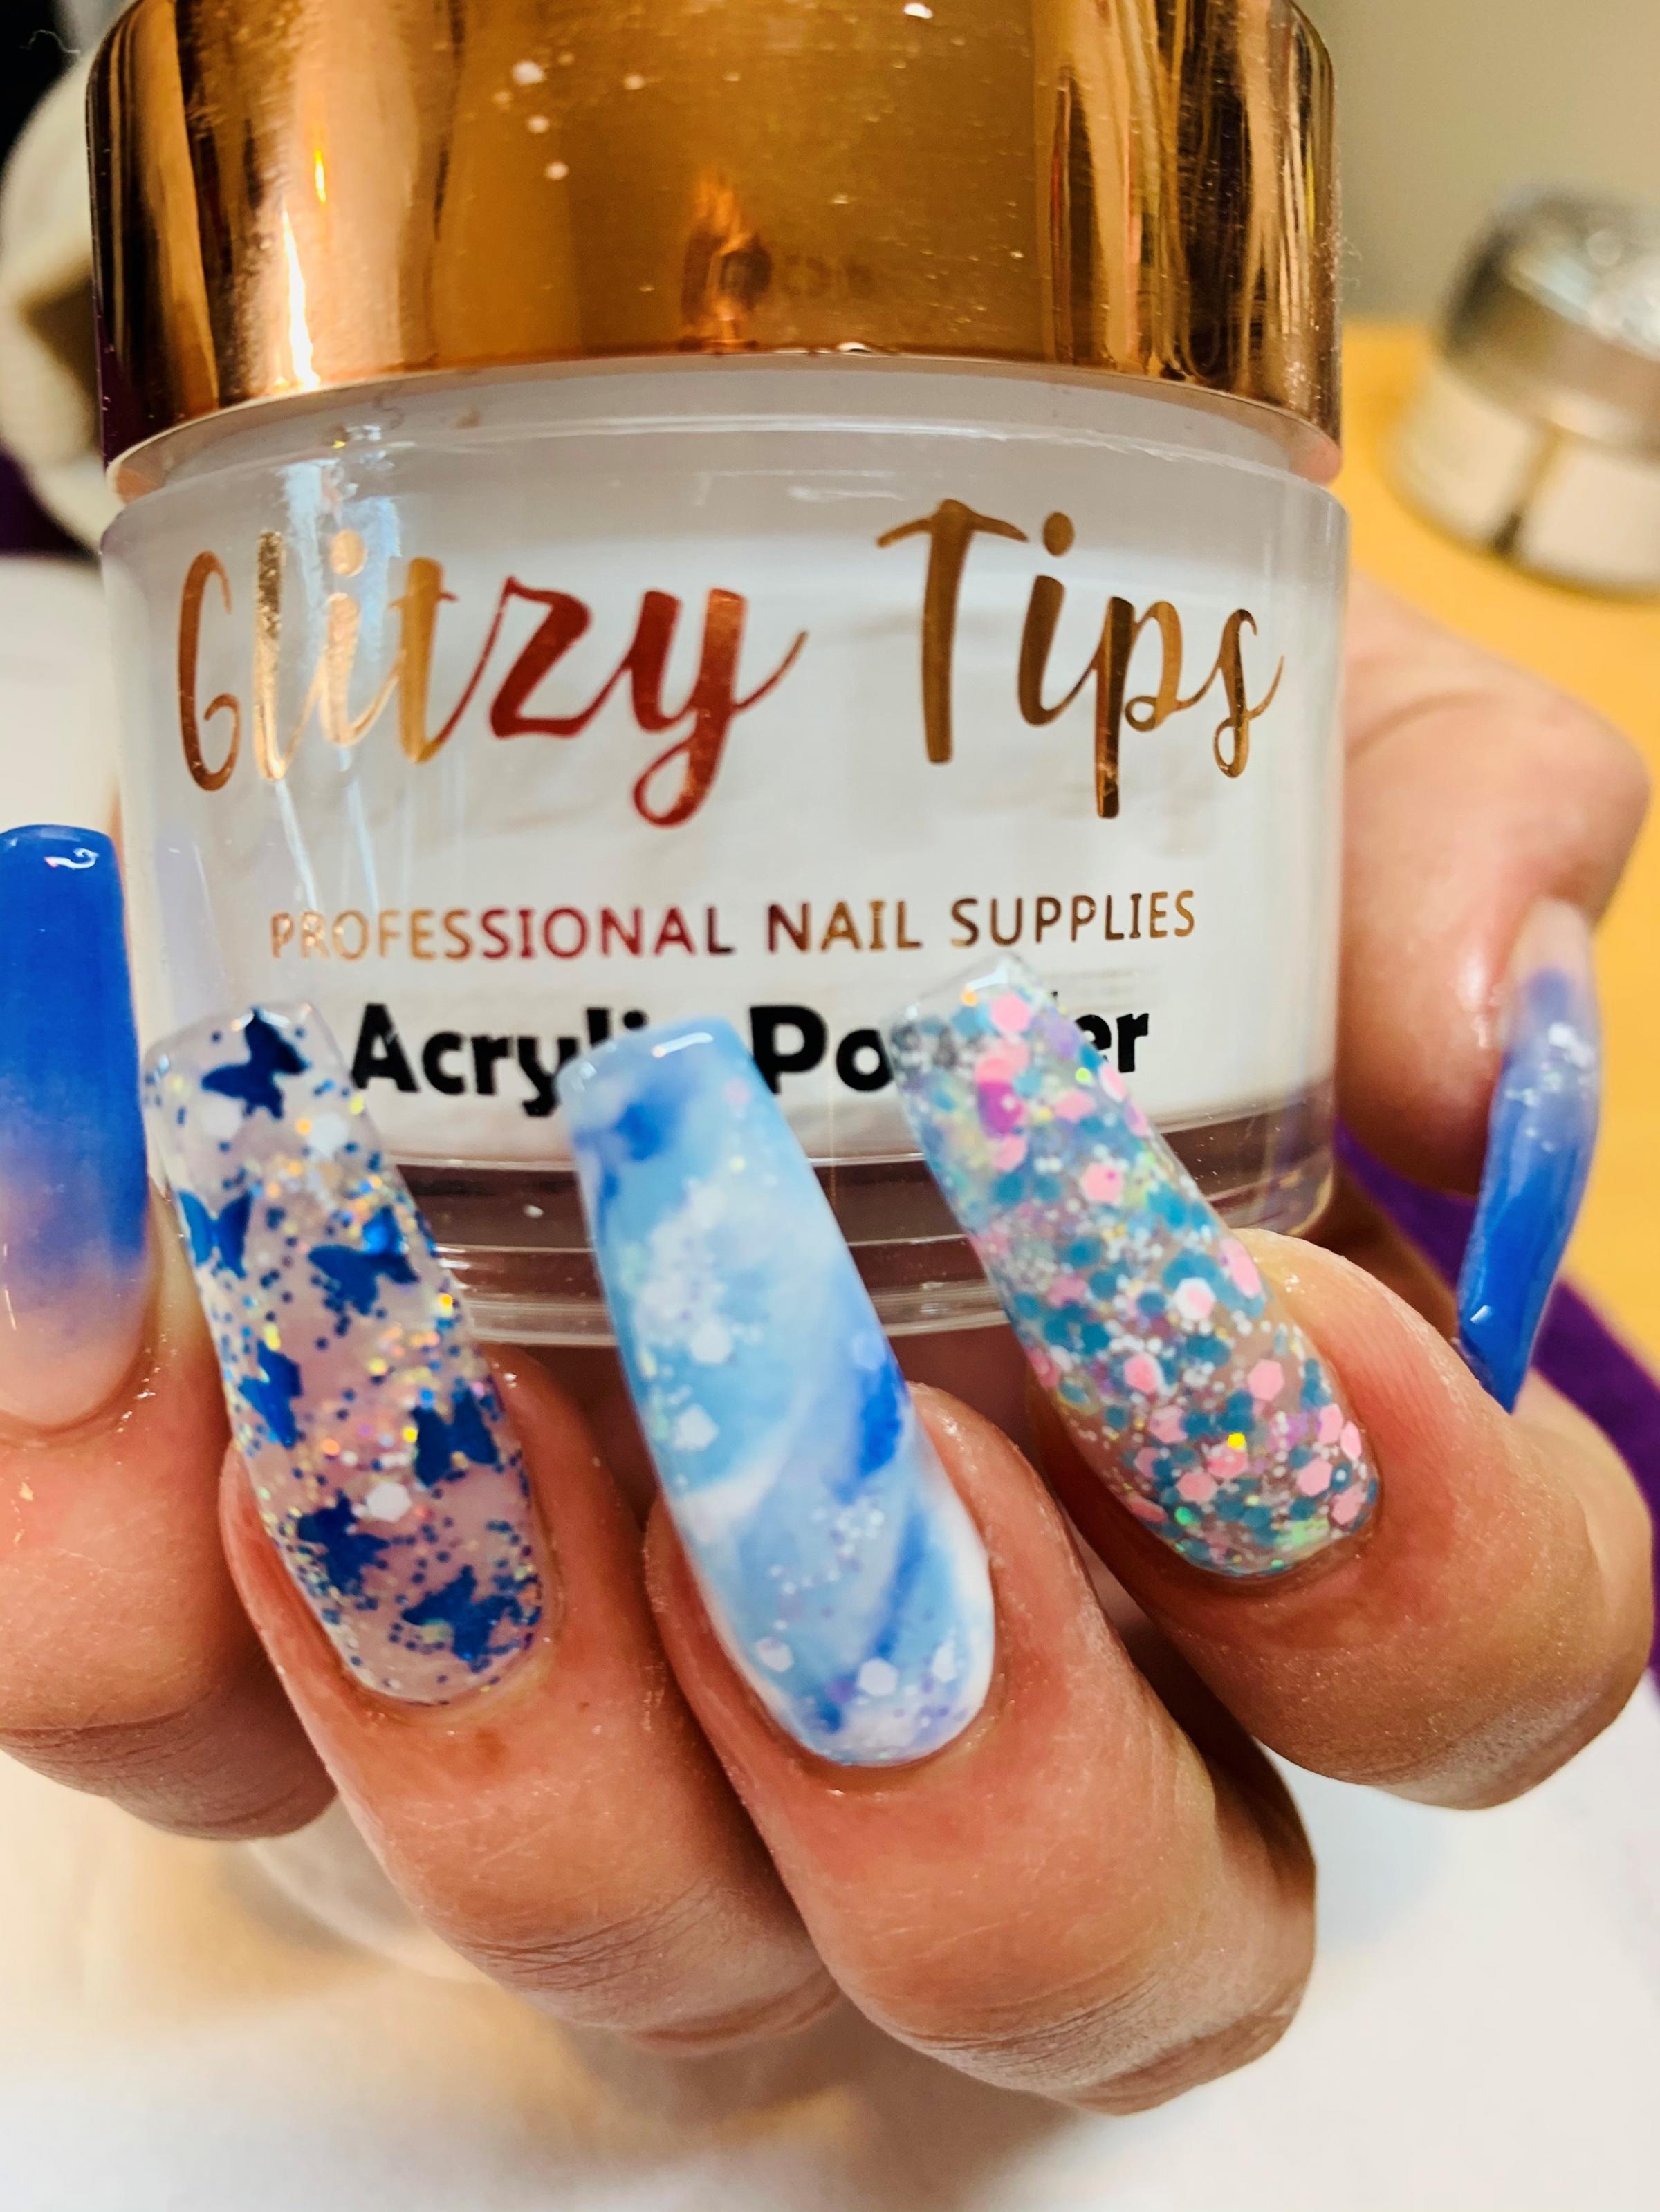 The Glitzy Tips brand covers all aspects of nail beauty, from acrylic powders to gels and more